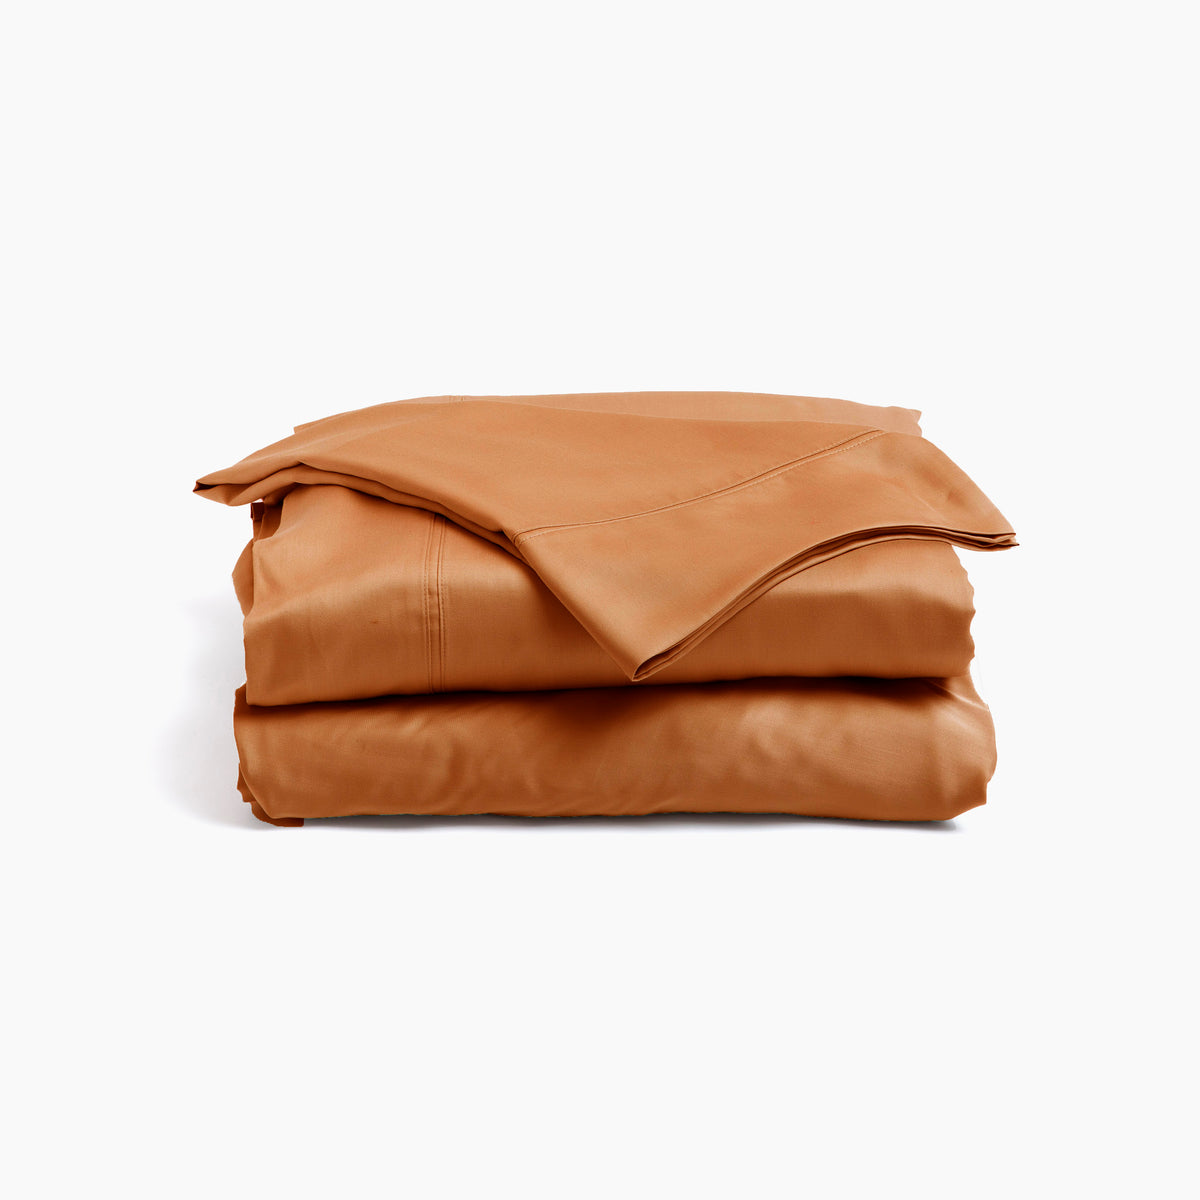 Image showcasing entire Clay Recovery Viscose Sheet Set all neatly folded on top of one another with a white background. The image shows (from top to bottom): pillowcase, flat sheet, fitted sheet